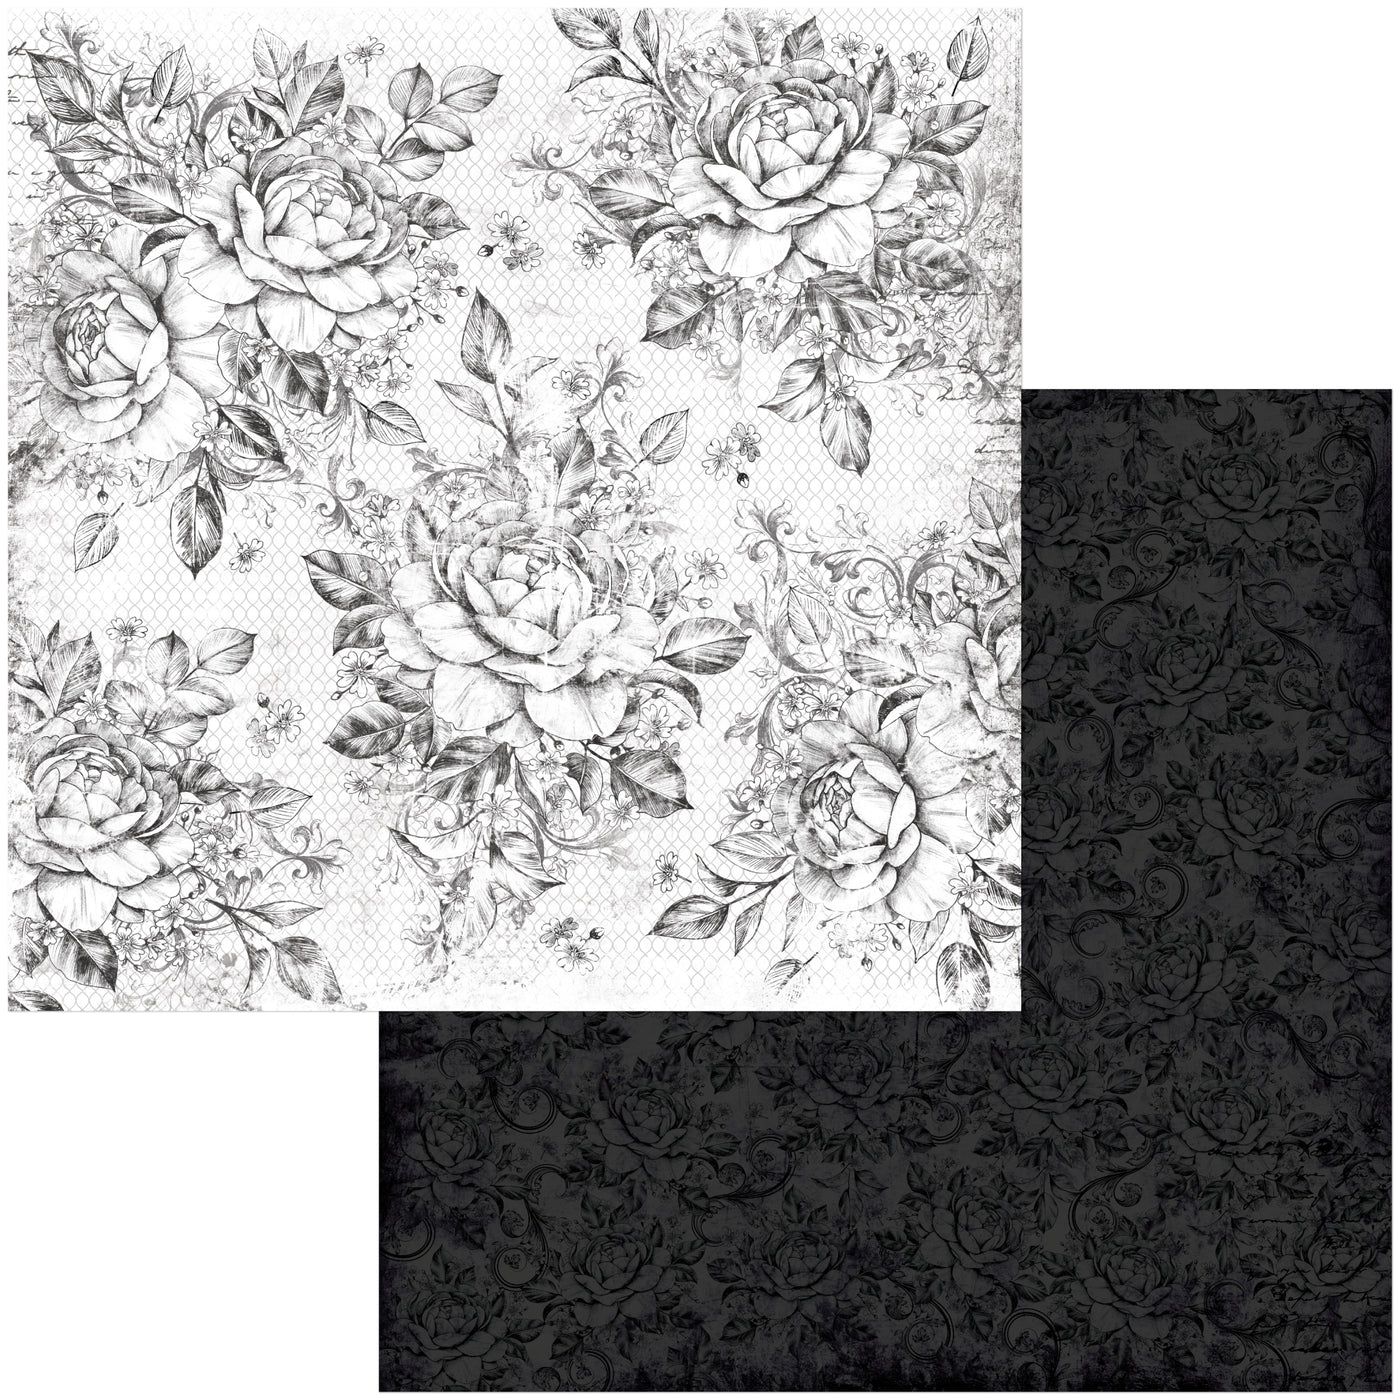 Roses - 12x12 double-sided patterned paper with black and white rose motifs - BoBunny